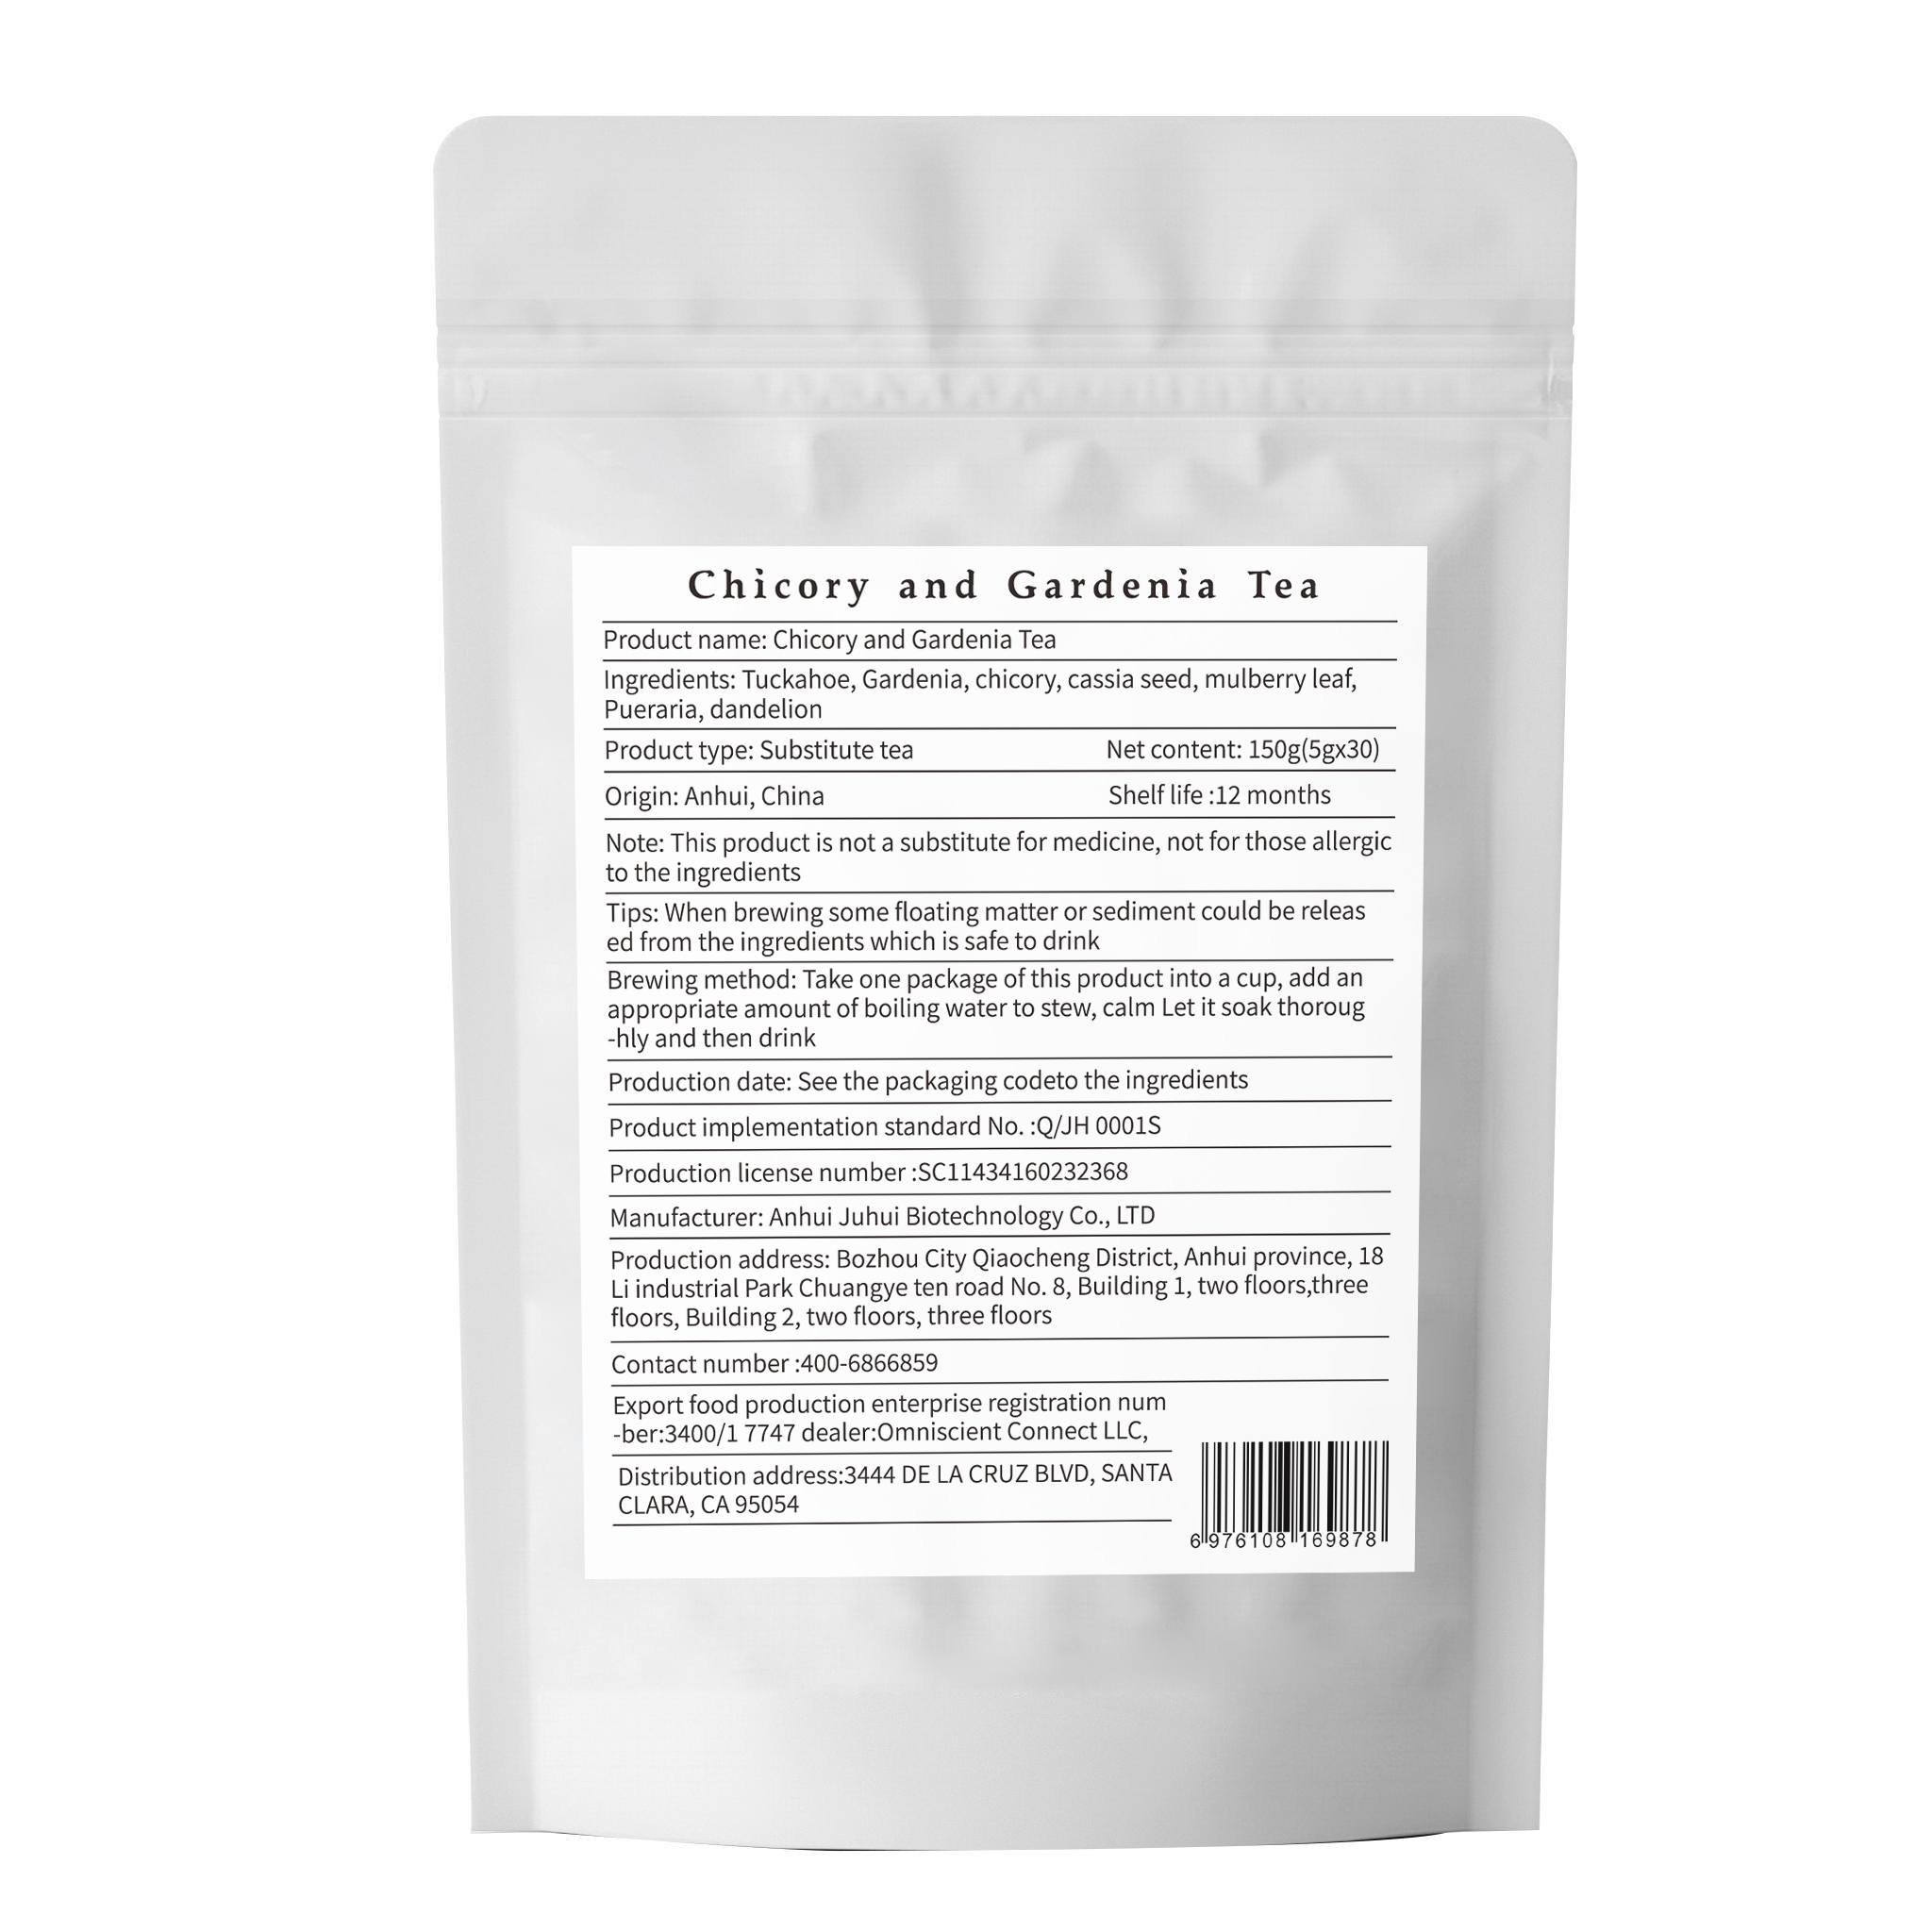 Chicory and Gardenia Tea Gout-Relief Tea 30 Teabags per Pack